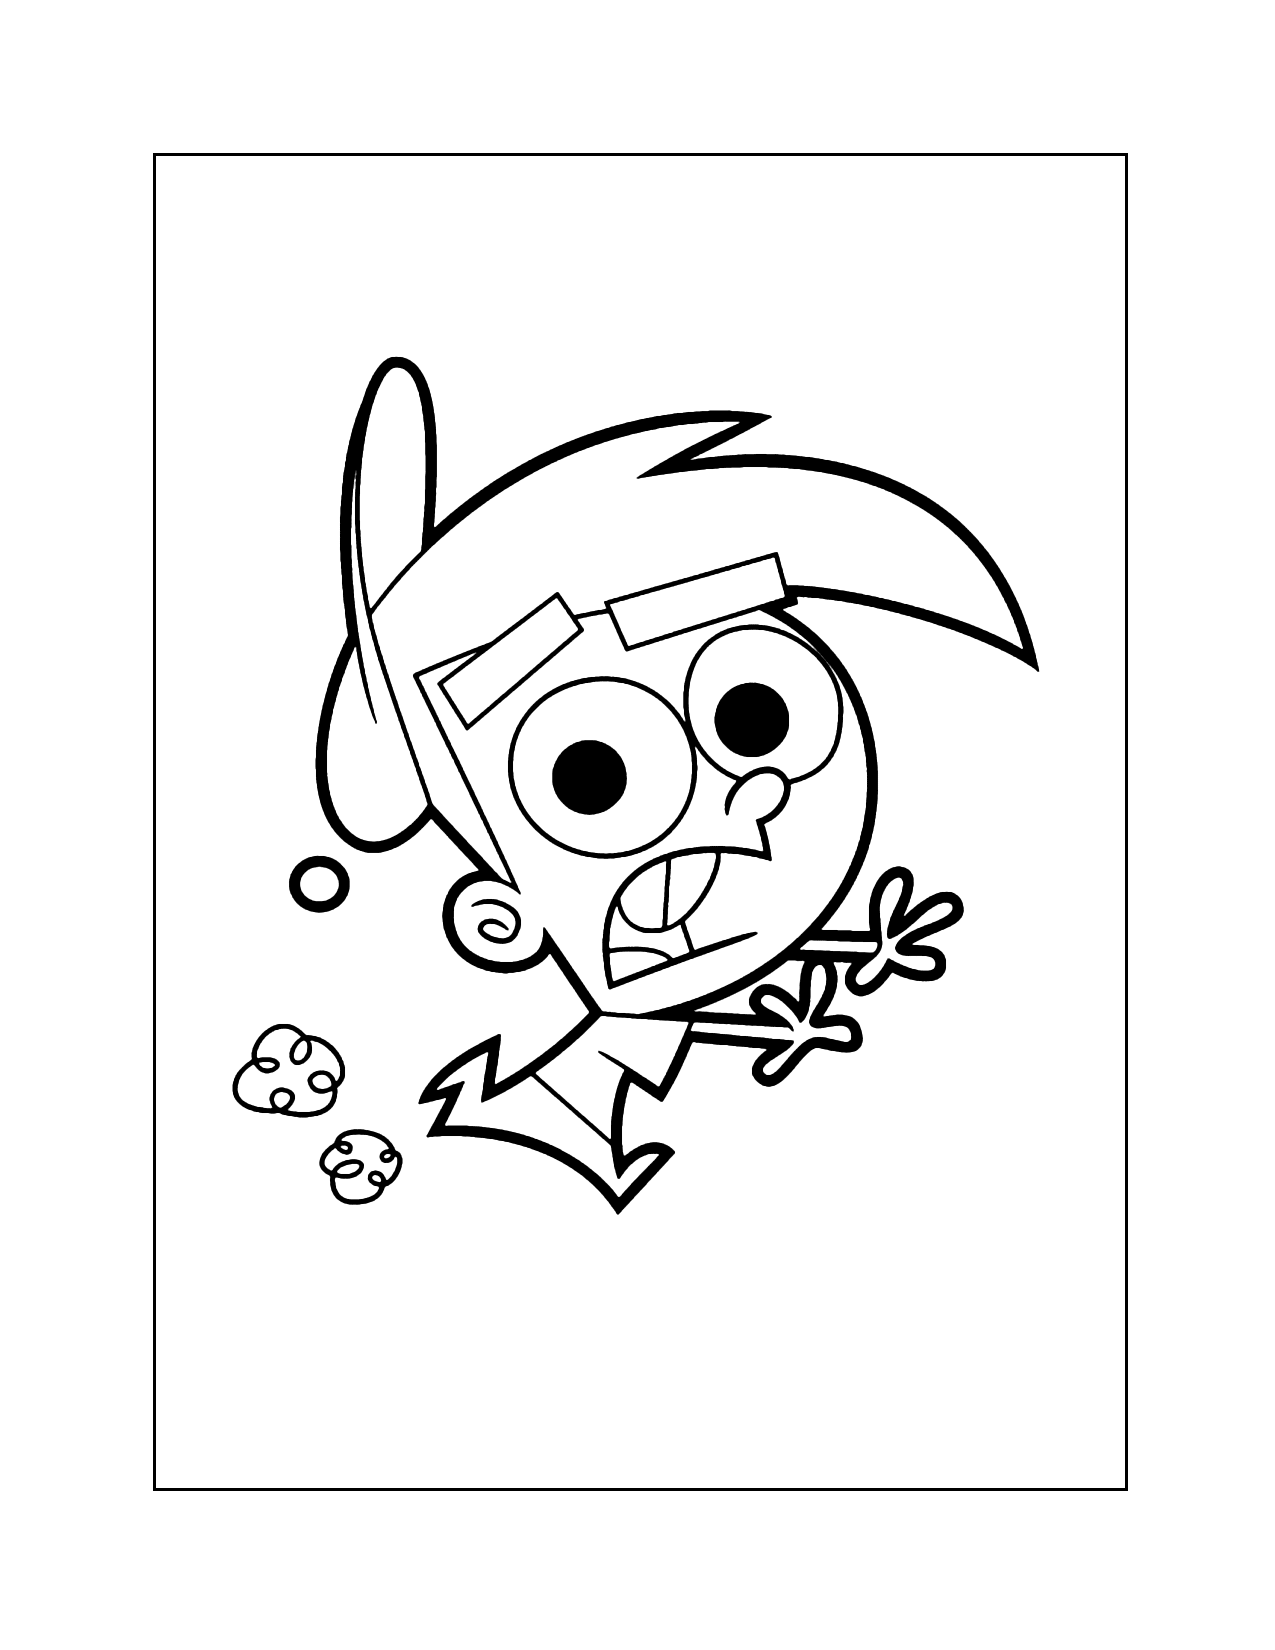 Timmy Turner Running Coloring Page